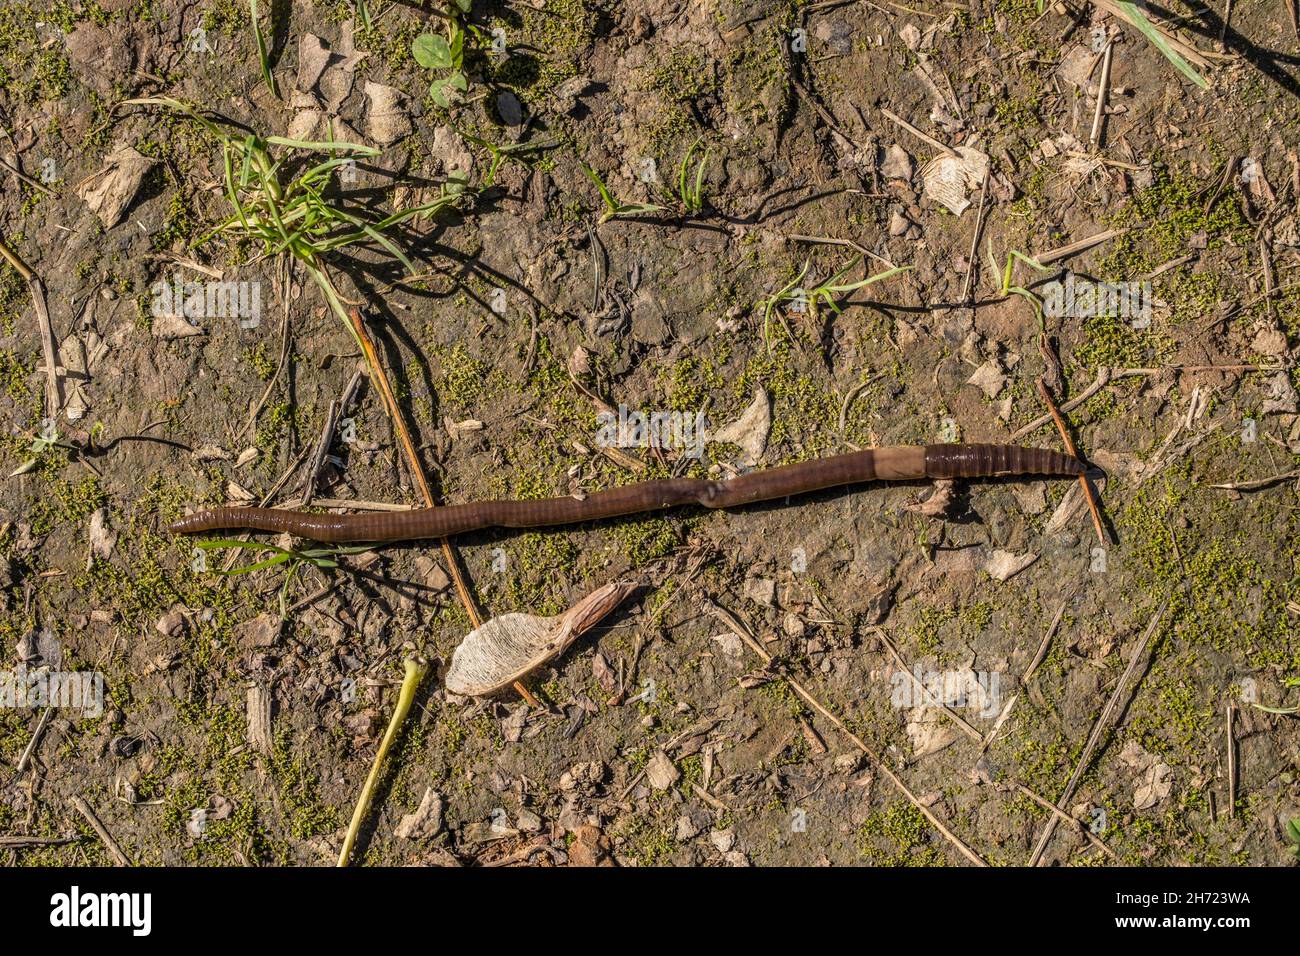 A long earthworm that looks like it had injuries crawling along a wet ground across a footpath in the woodlands on a bright sunny day Stock Photo